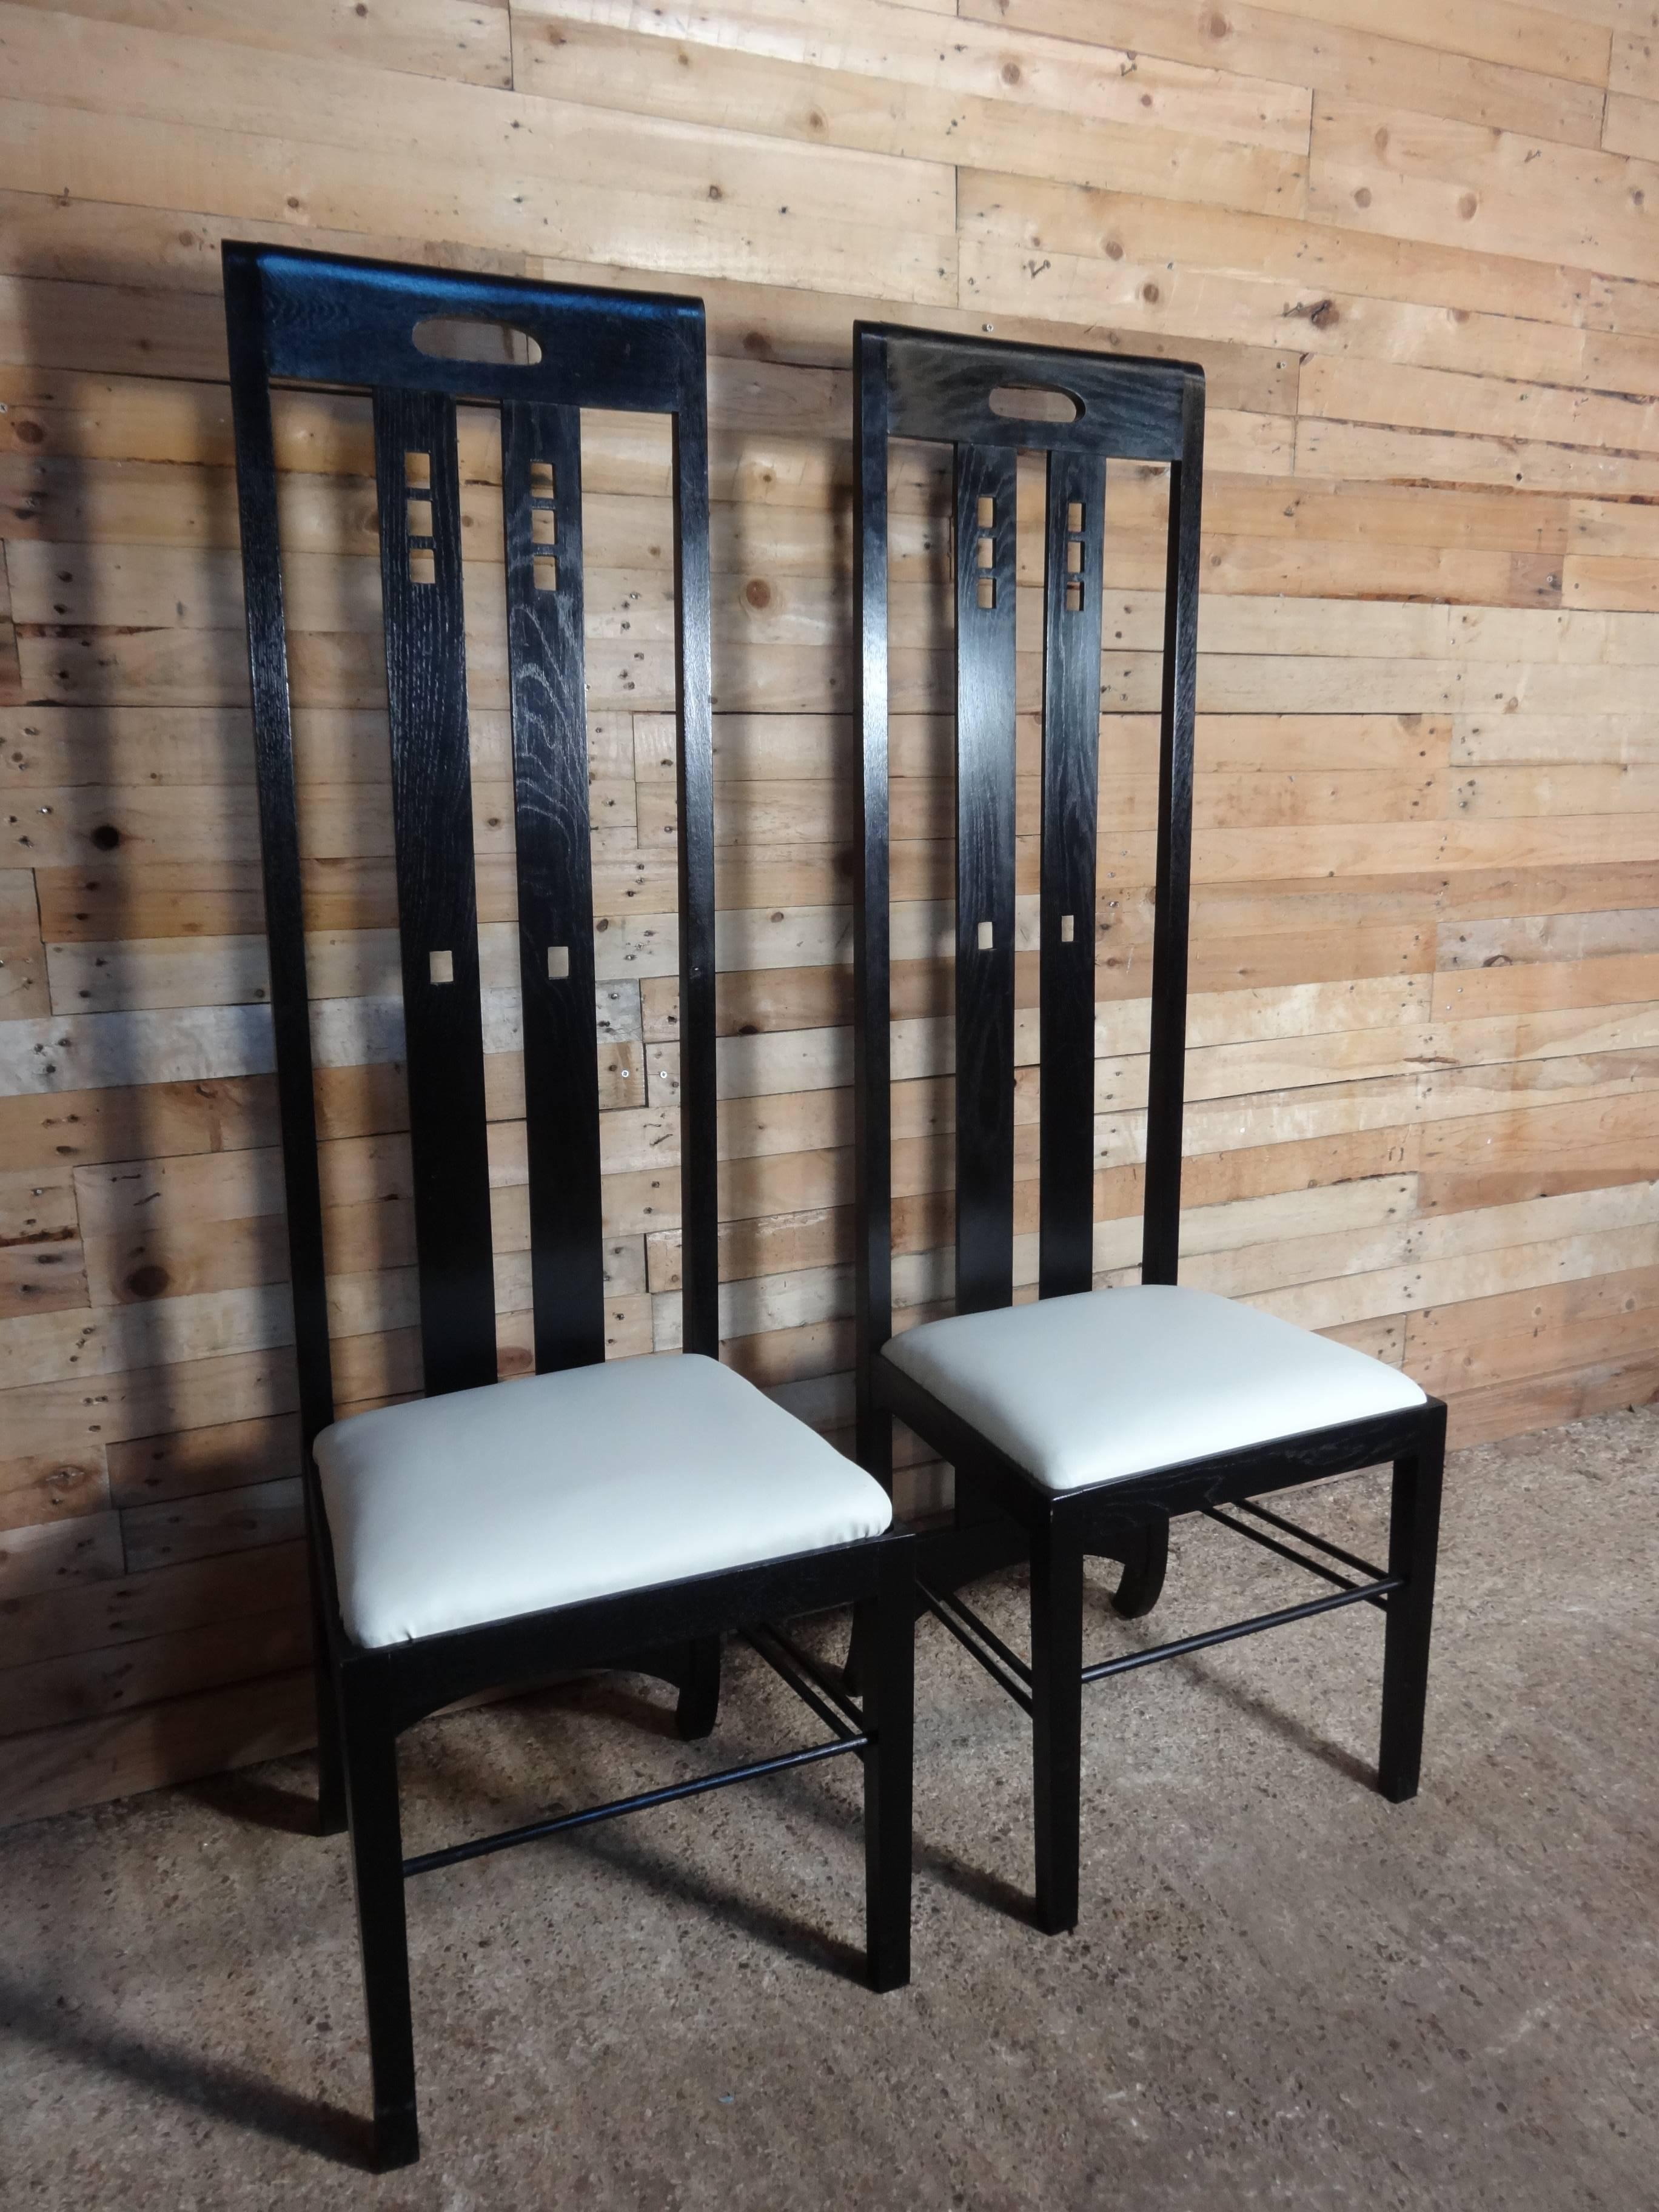 20th Century Art Nouveau Style Black Lacquer High Back Chairs, Labeled Macintosh